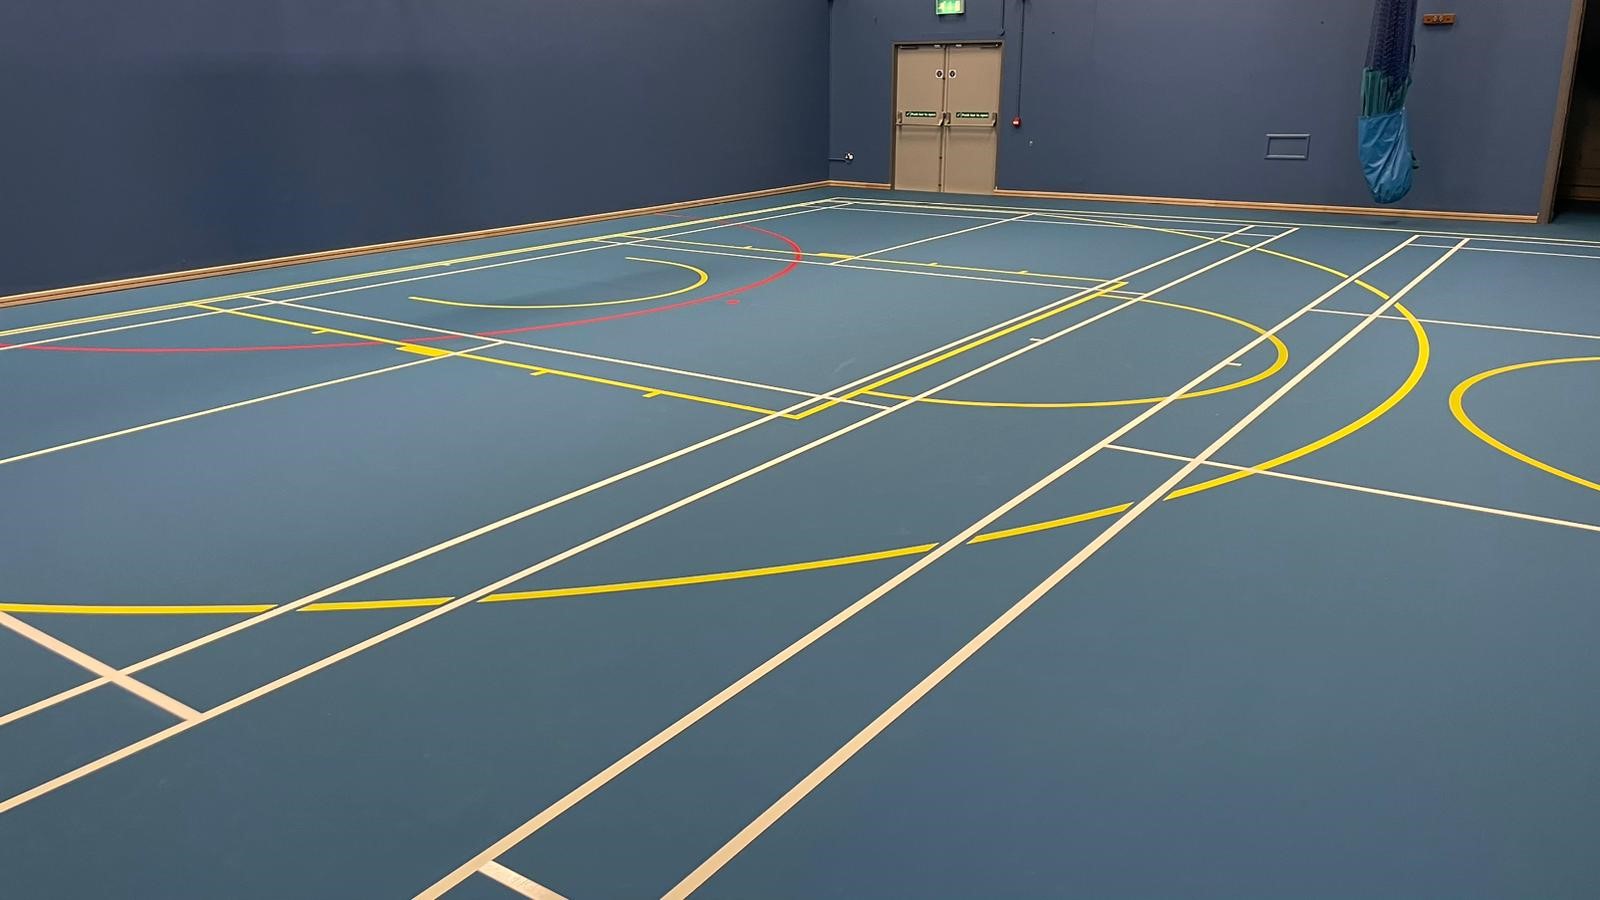 Our latest SSUK Pulastic Overlay Upgrade at Comber Leisure Centre in Belfast